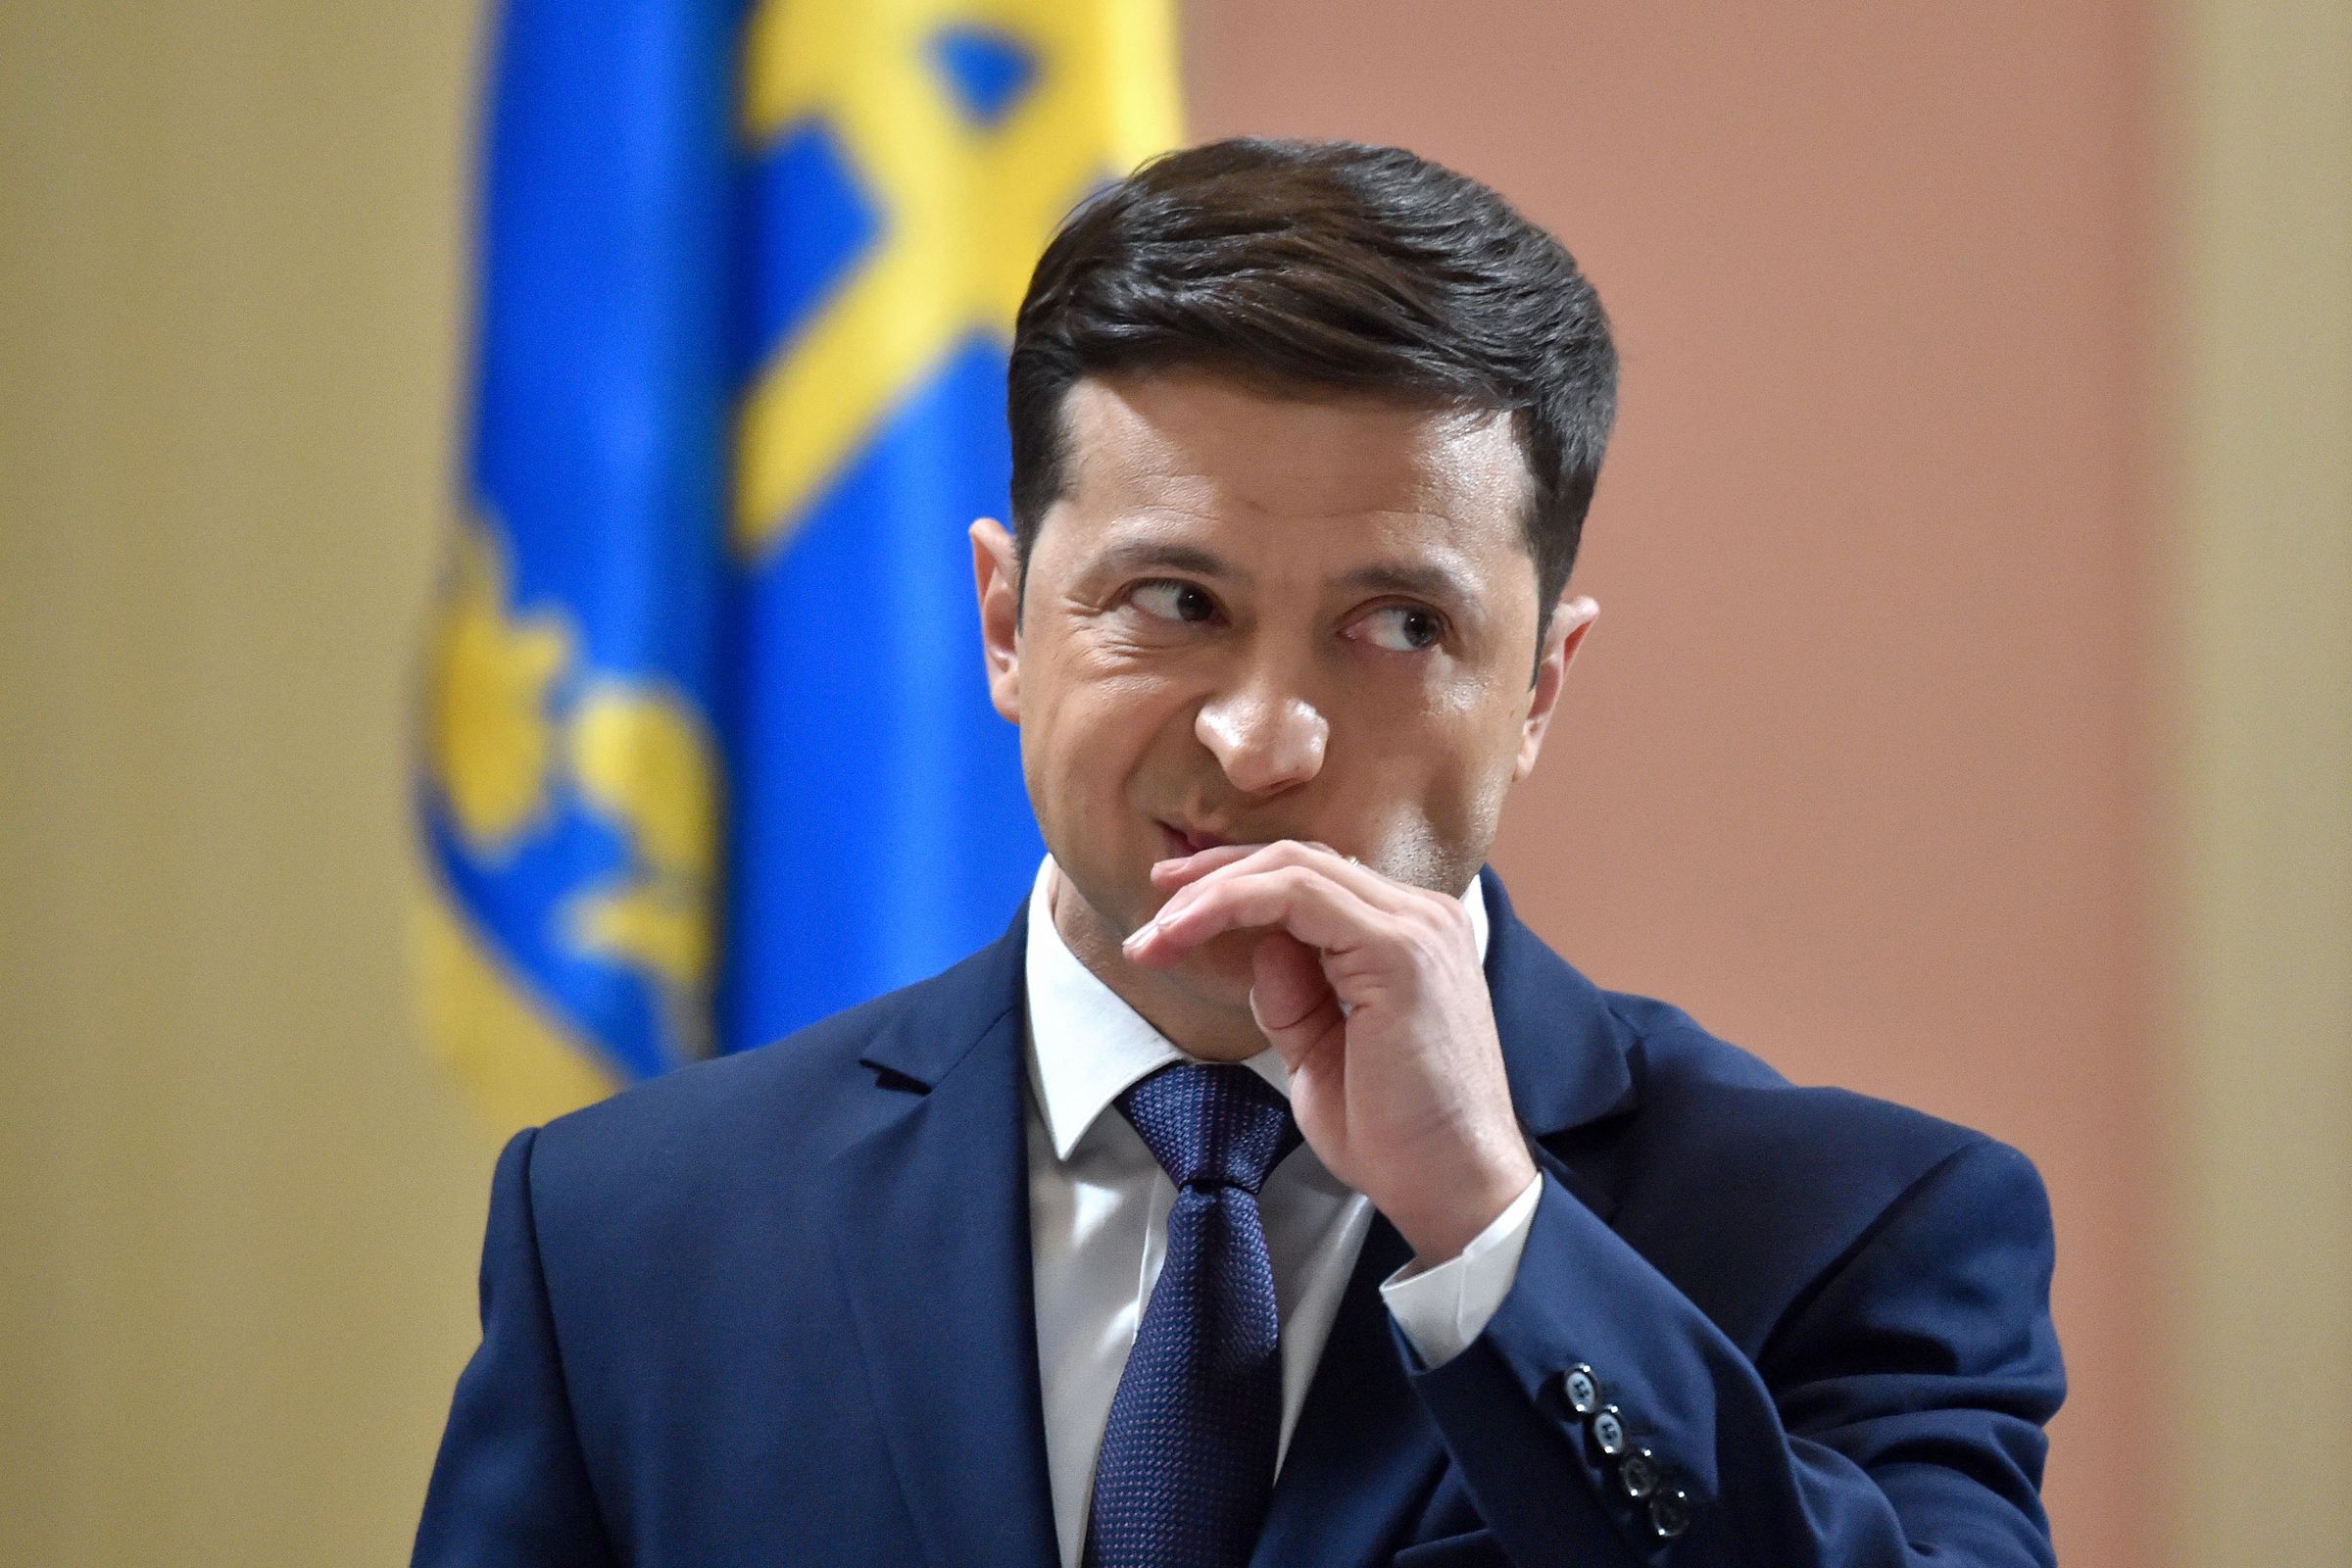 Volodymyr Zelenskyy once played Ukraine’s president in a comedy series.